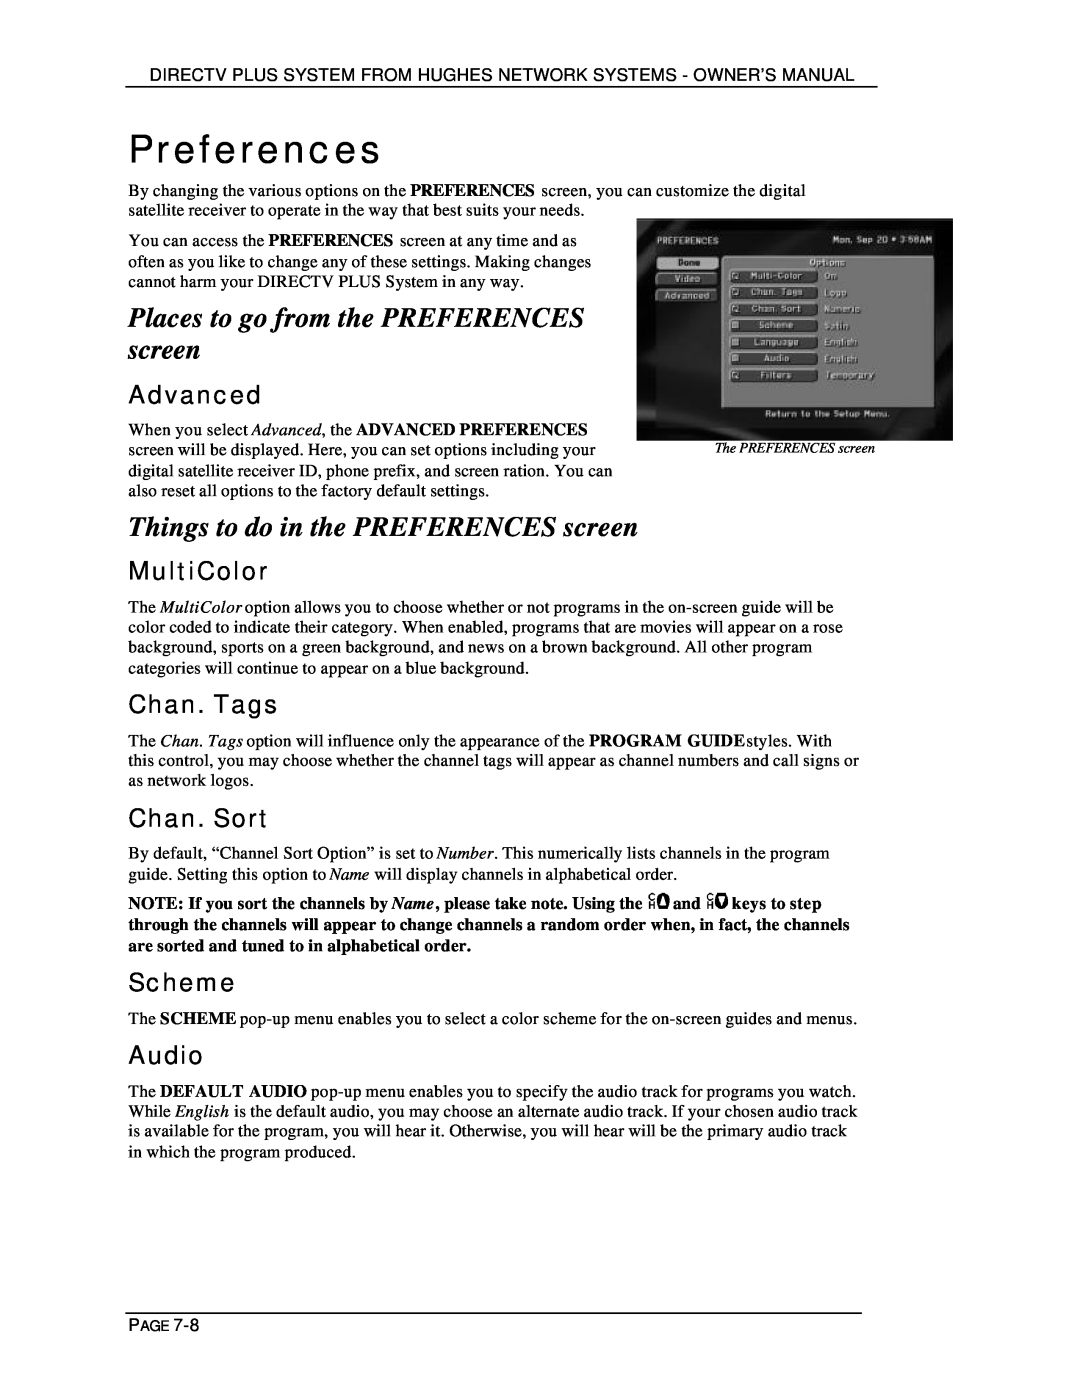 DirecTV HIRD-E25 Preferences, Places to go from the PREFERENCES screen, Things to do in the PREFERENCES screen, Advanced 